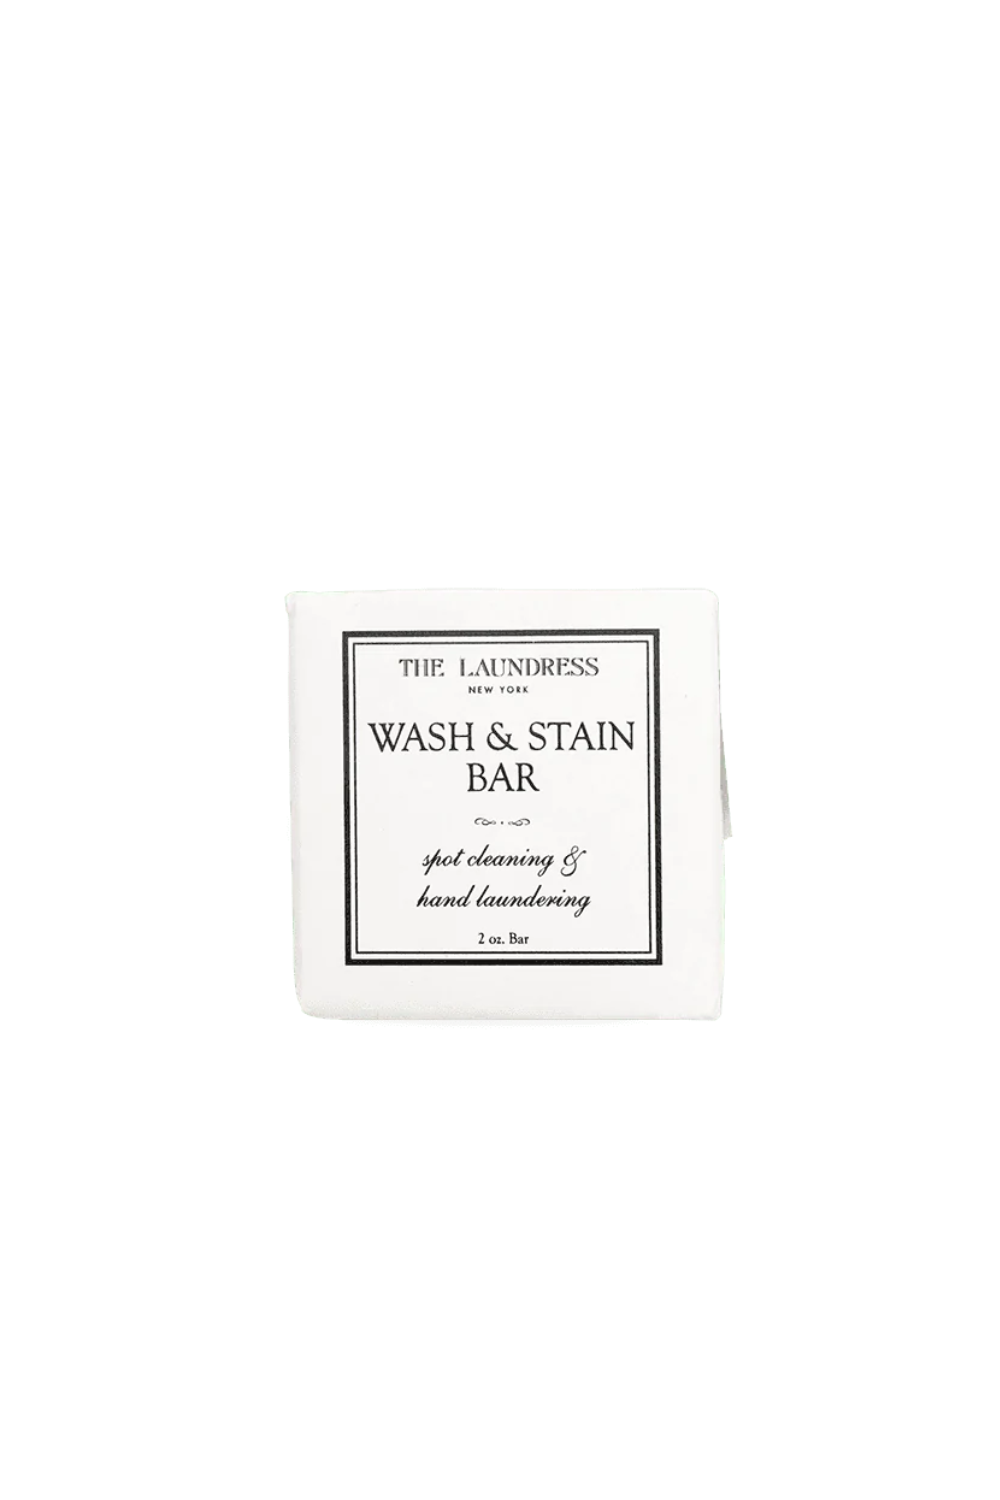 O'TAY Wash and Stain Bar Care Products